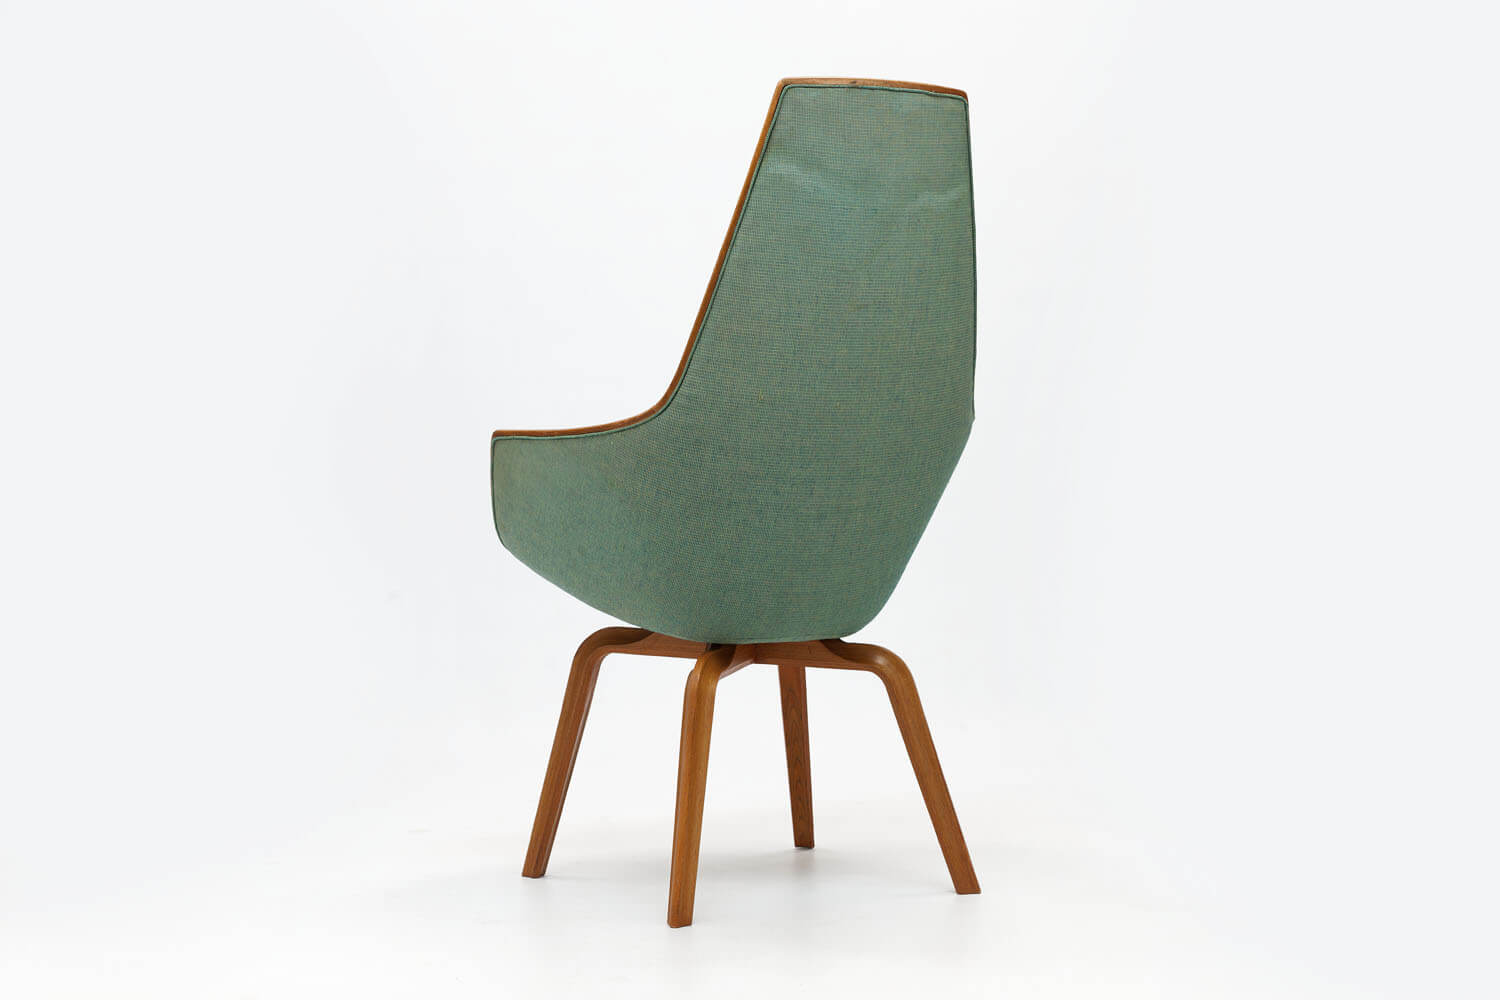 ‘Private Collection’ Vintage Giraffe Chair